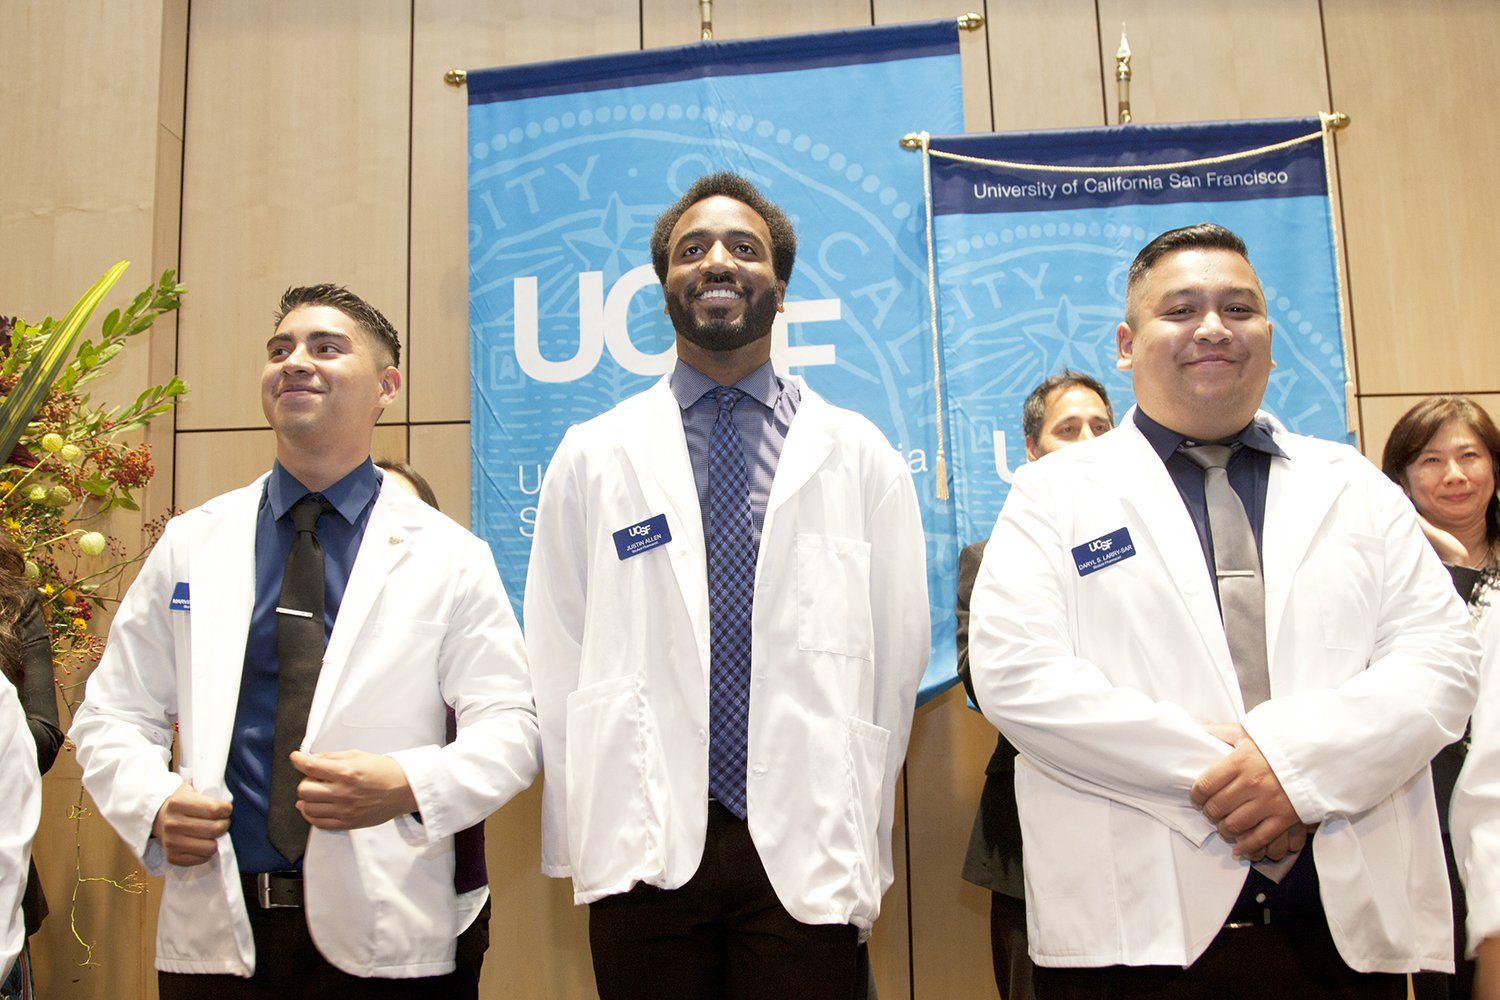 New School of Pharmacy students smile after receiving the white coats